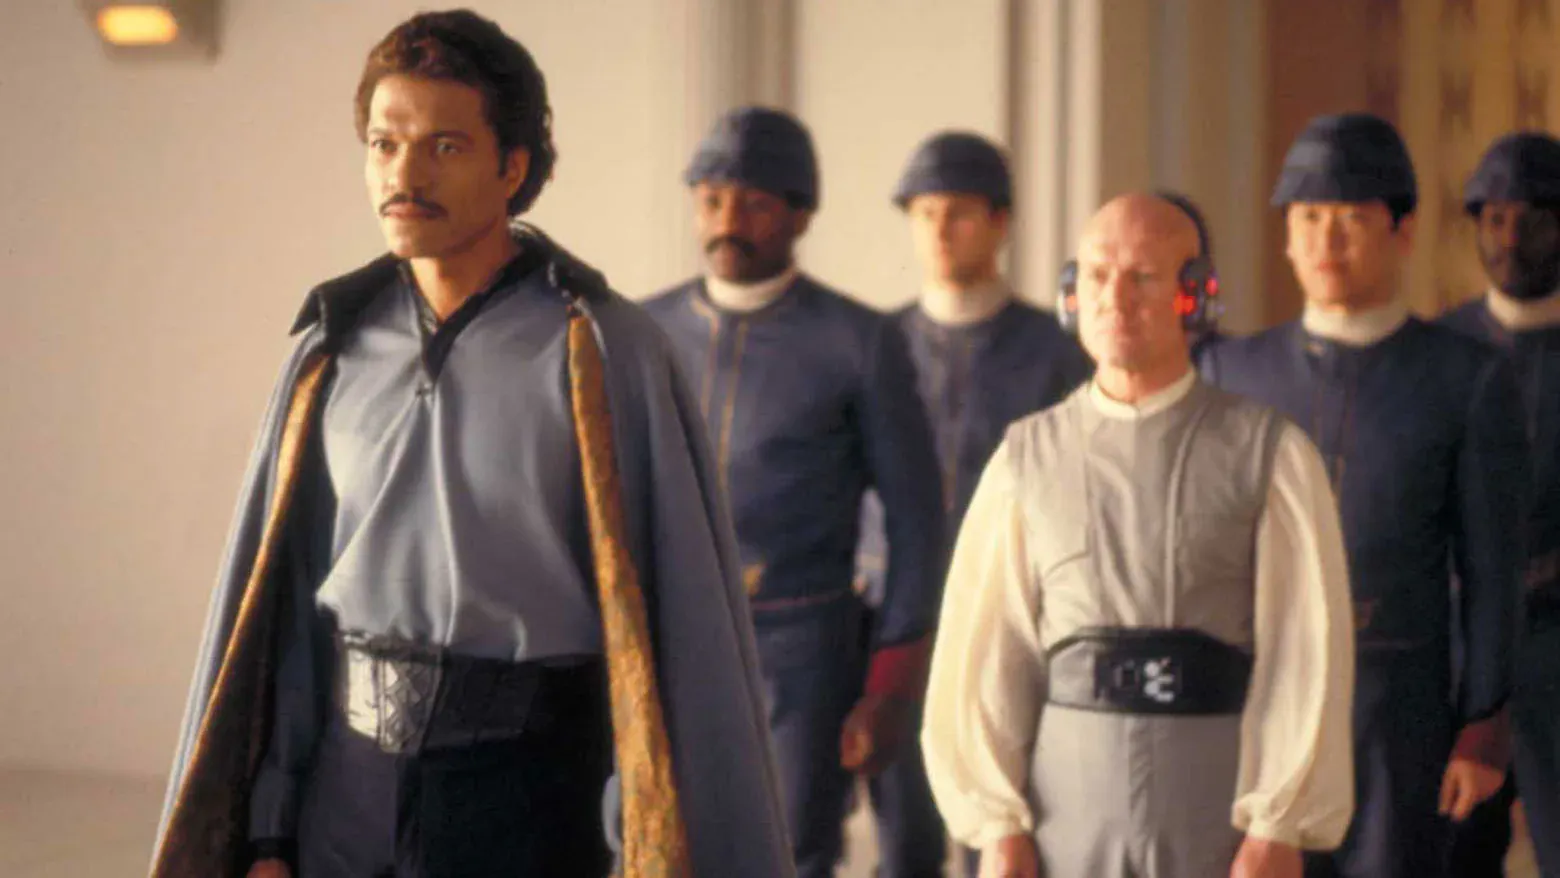 Lando Calrissian (Billy Dee Williams) wears a cloak and is followed by Lobot (John Hollis) and four Cloud City security in blue uniforms.